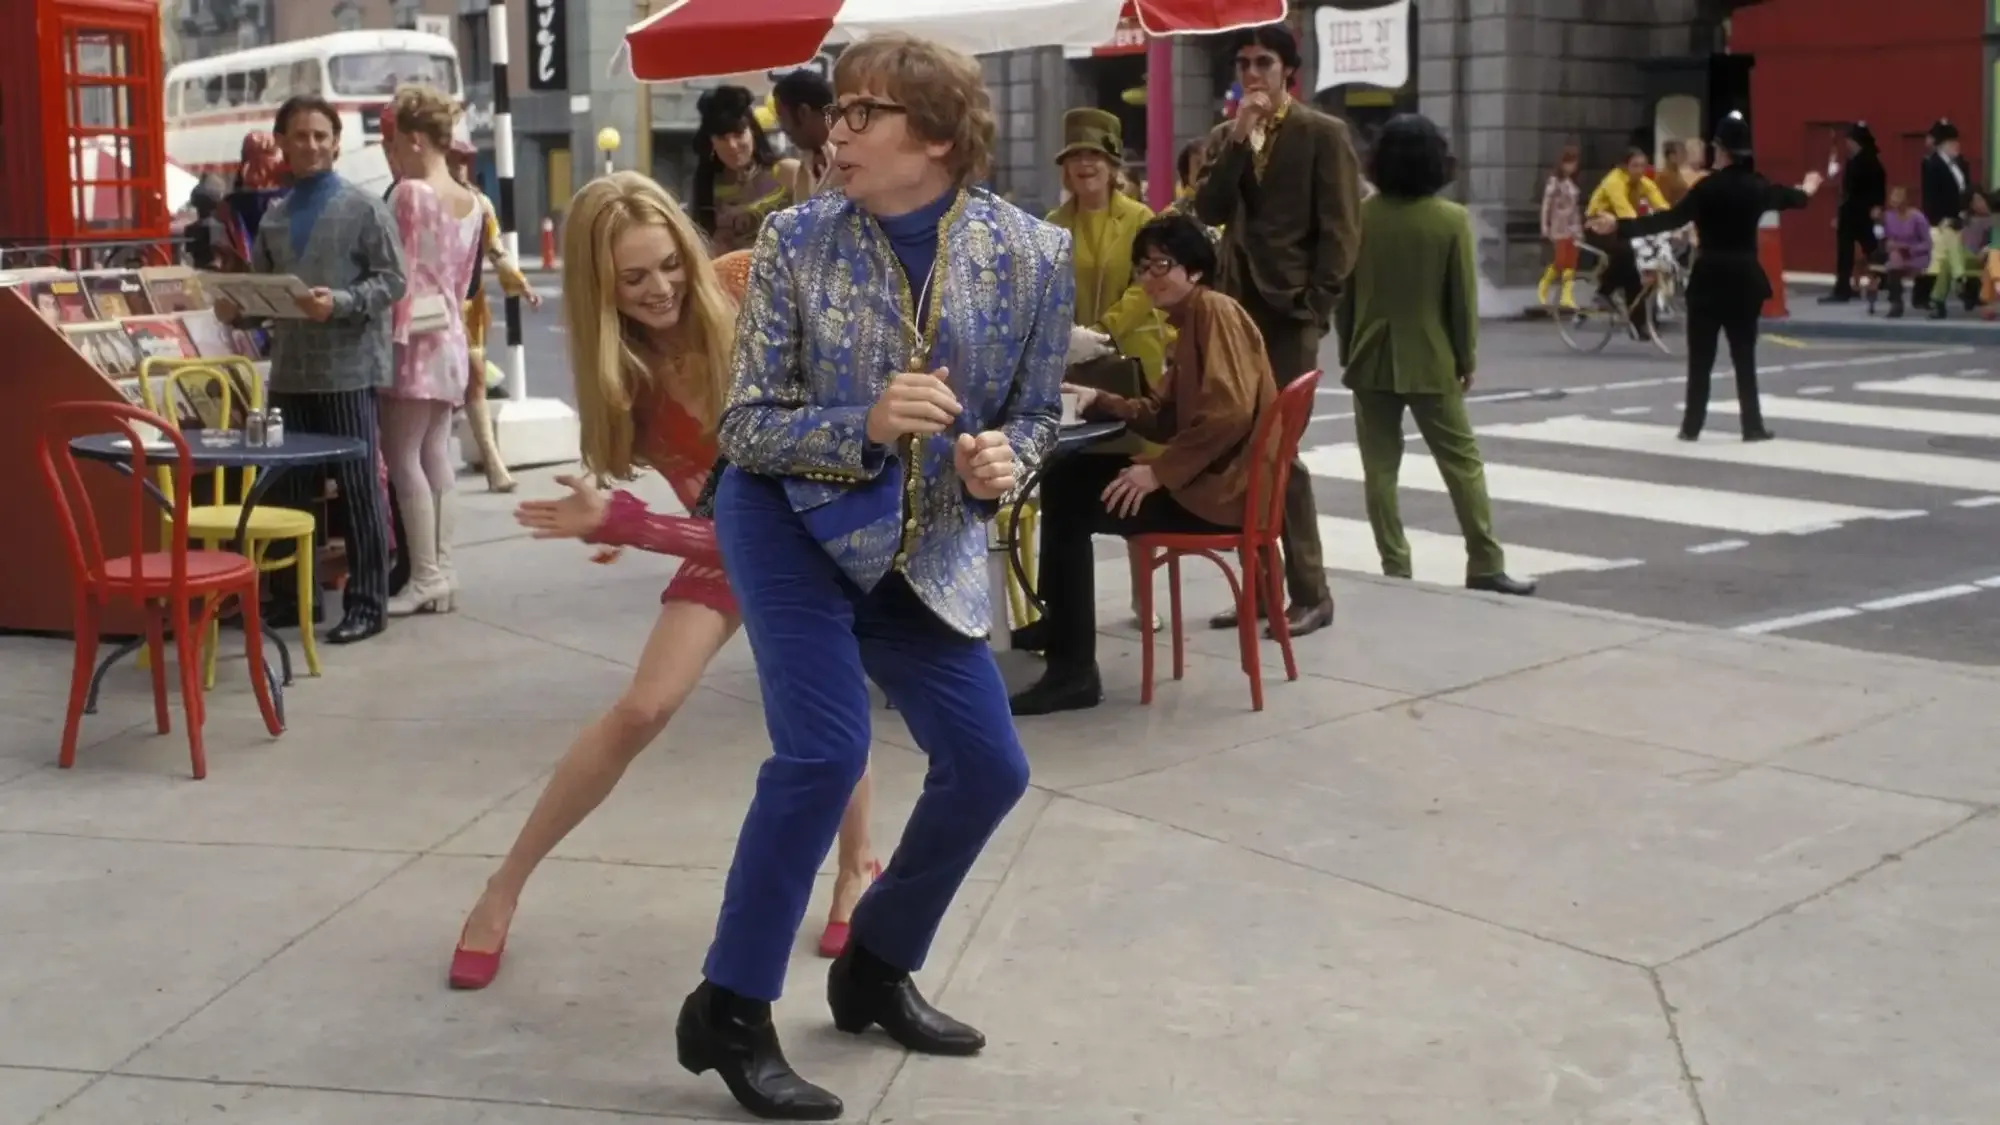 Austin Powers: The Spy Who Shagged Me movie review